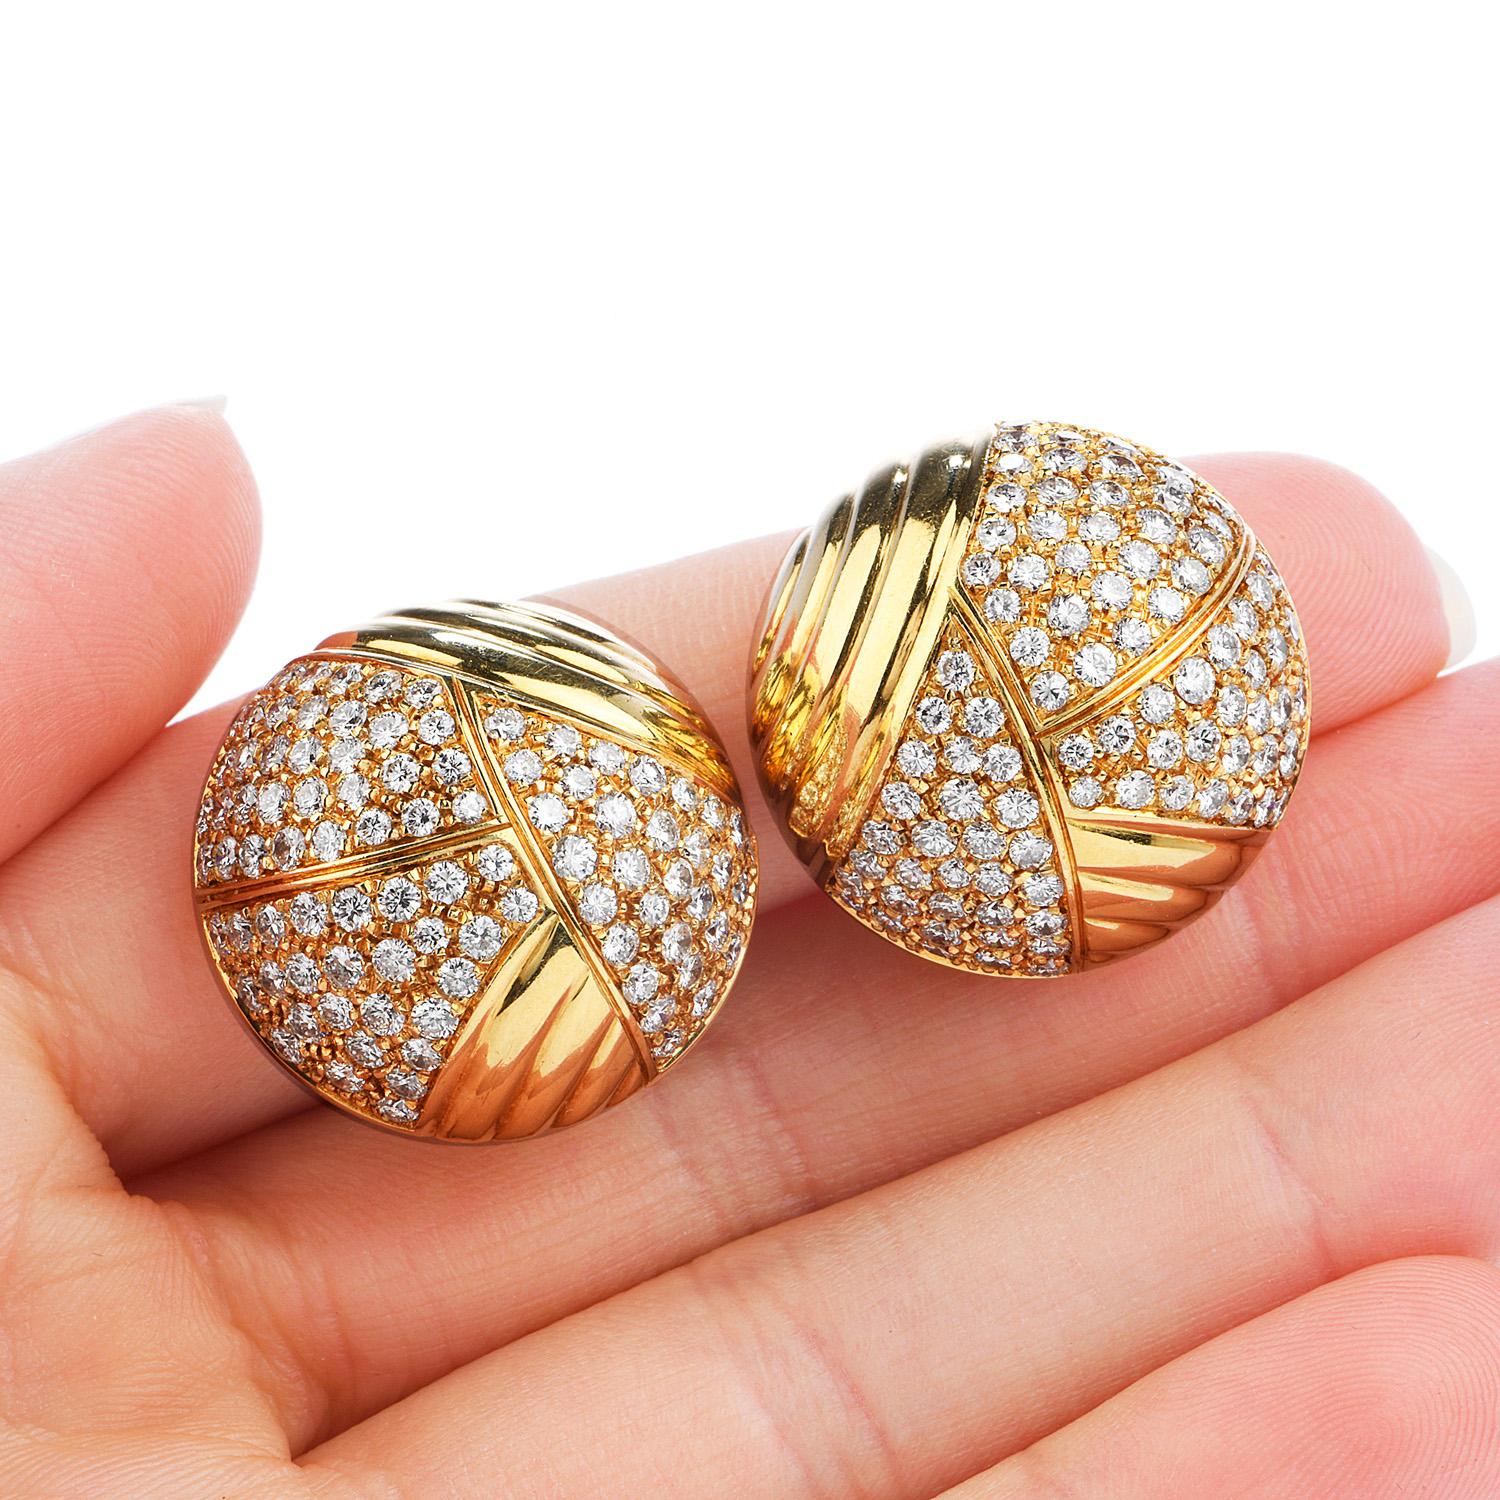 Cartier Vintage 6.10 Carat Diamond 18k Gold Dome Clip On Earrings In Excellent Condition For Sale In Miami, FL